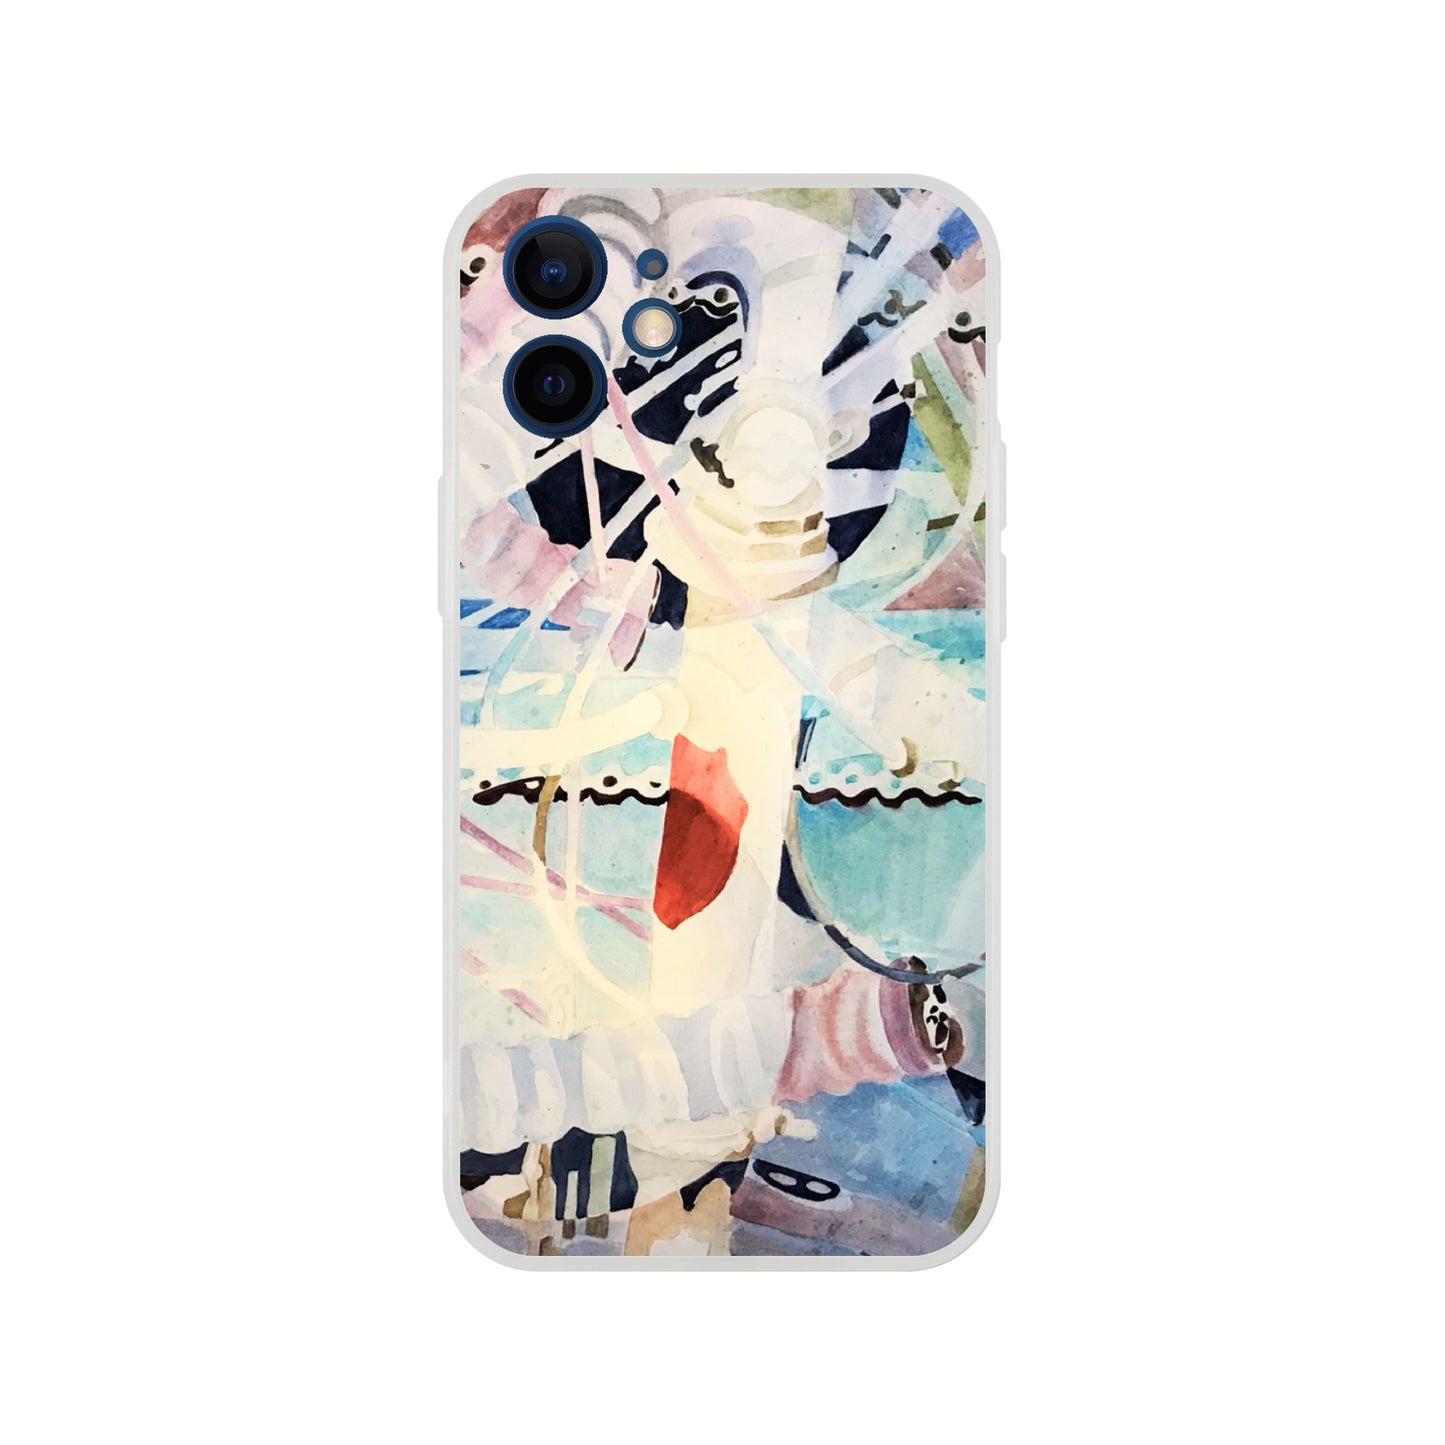 "Wheel in a Wheel" Flexi Phone Case for Iphone or Samsung by Barbara Cleary Designs